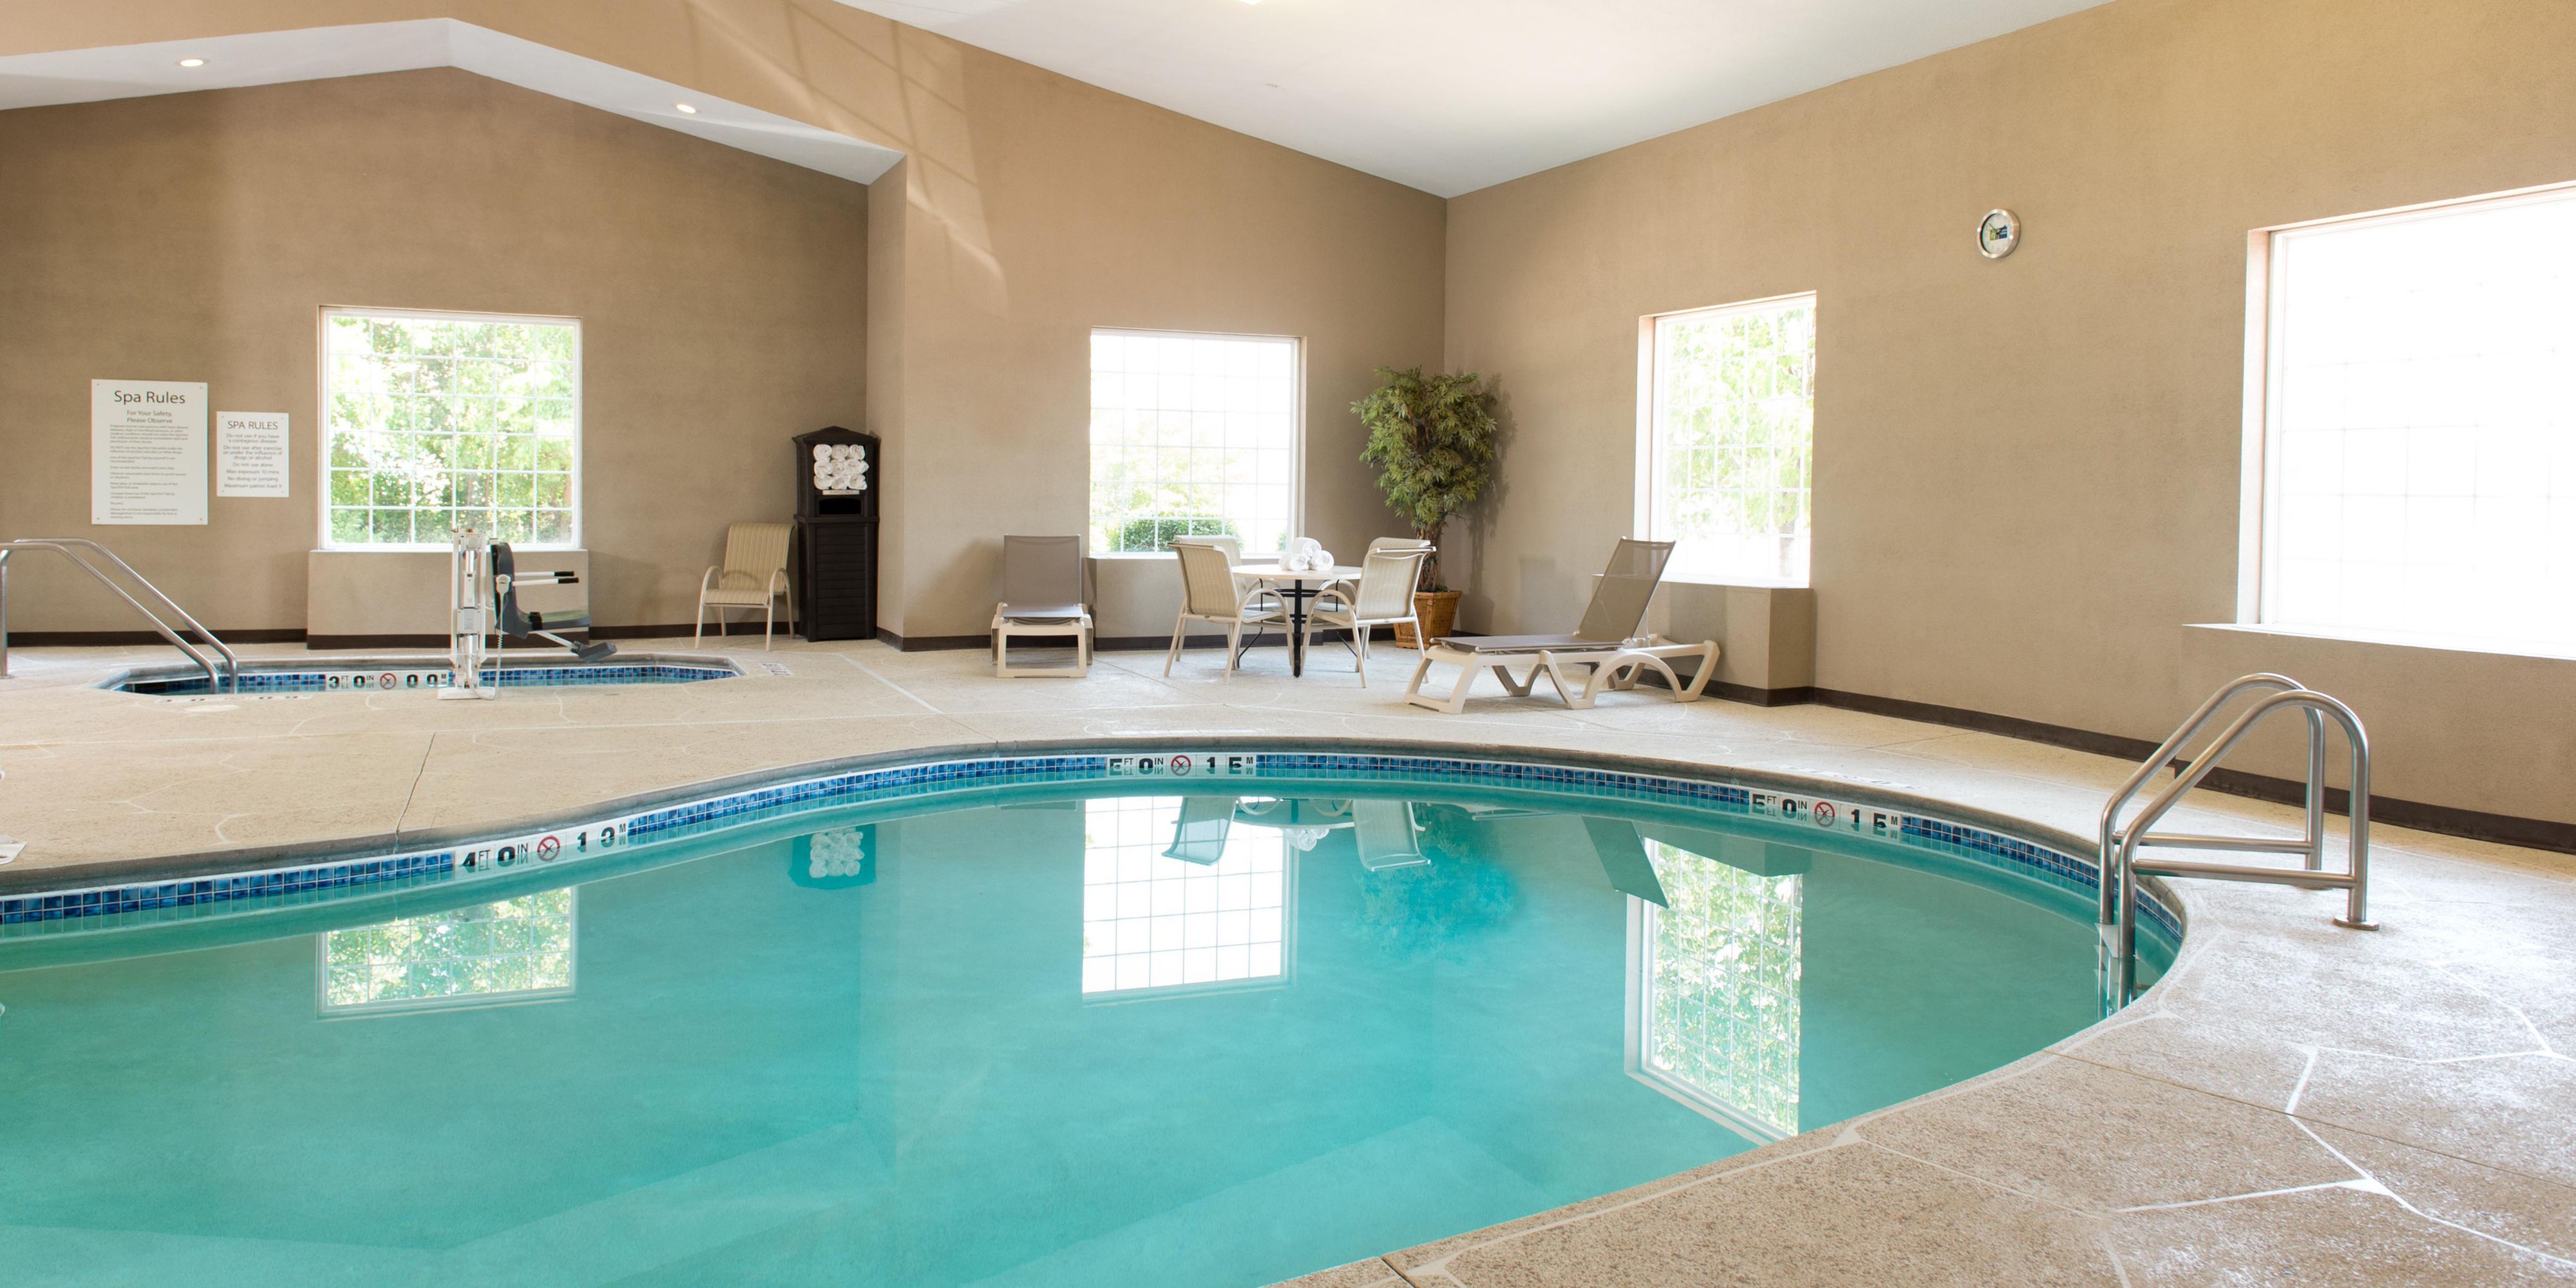 Enjoy our indoor pool and hot tub during your stay. Both are open daily from 6am to 11pm.